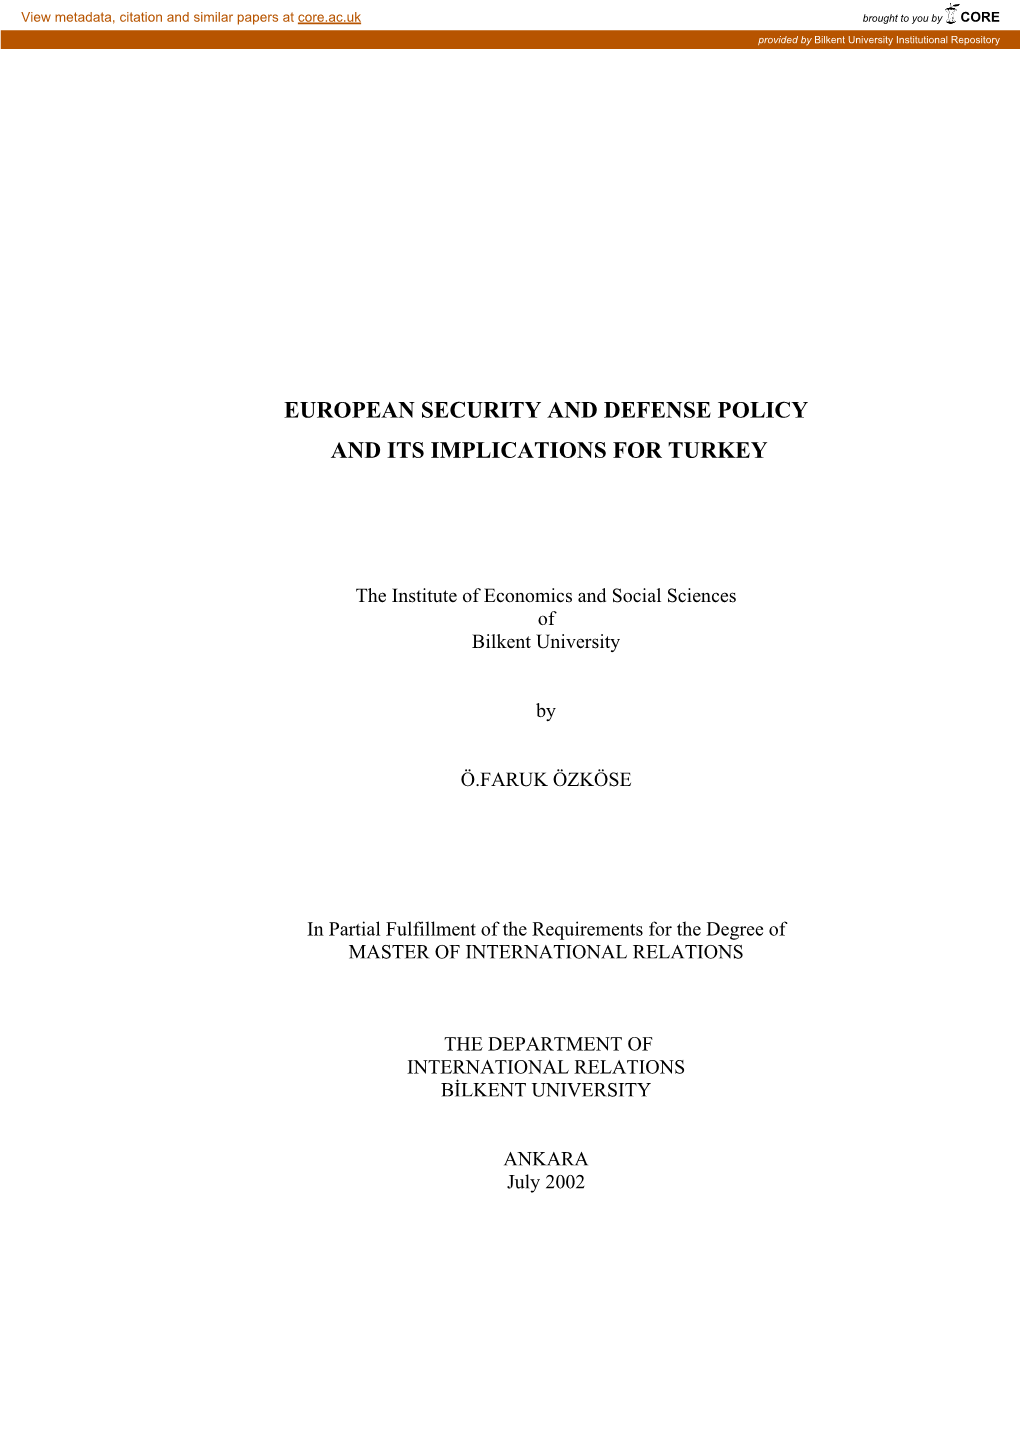 European Security and Defense Policy and Its Implications for Turkey